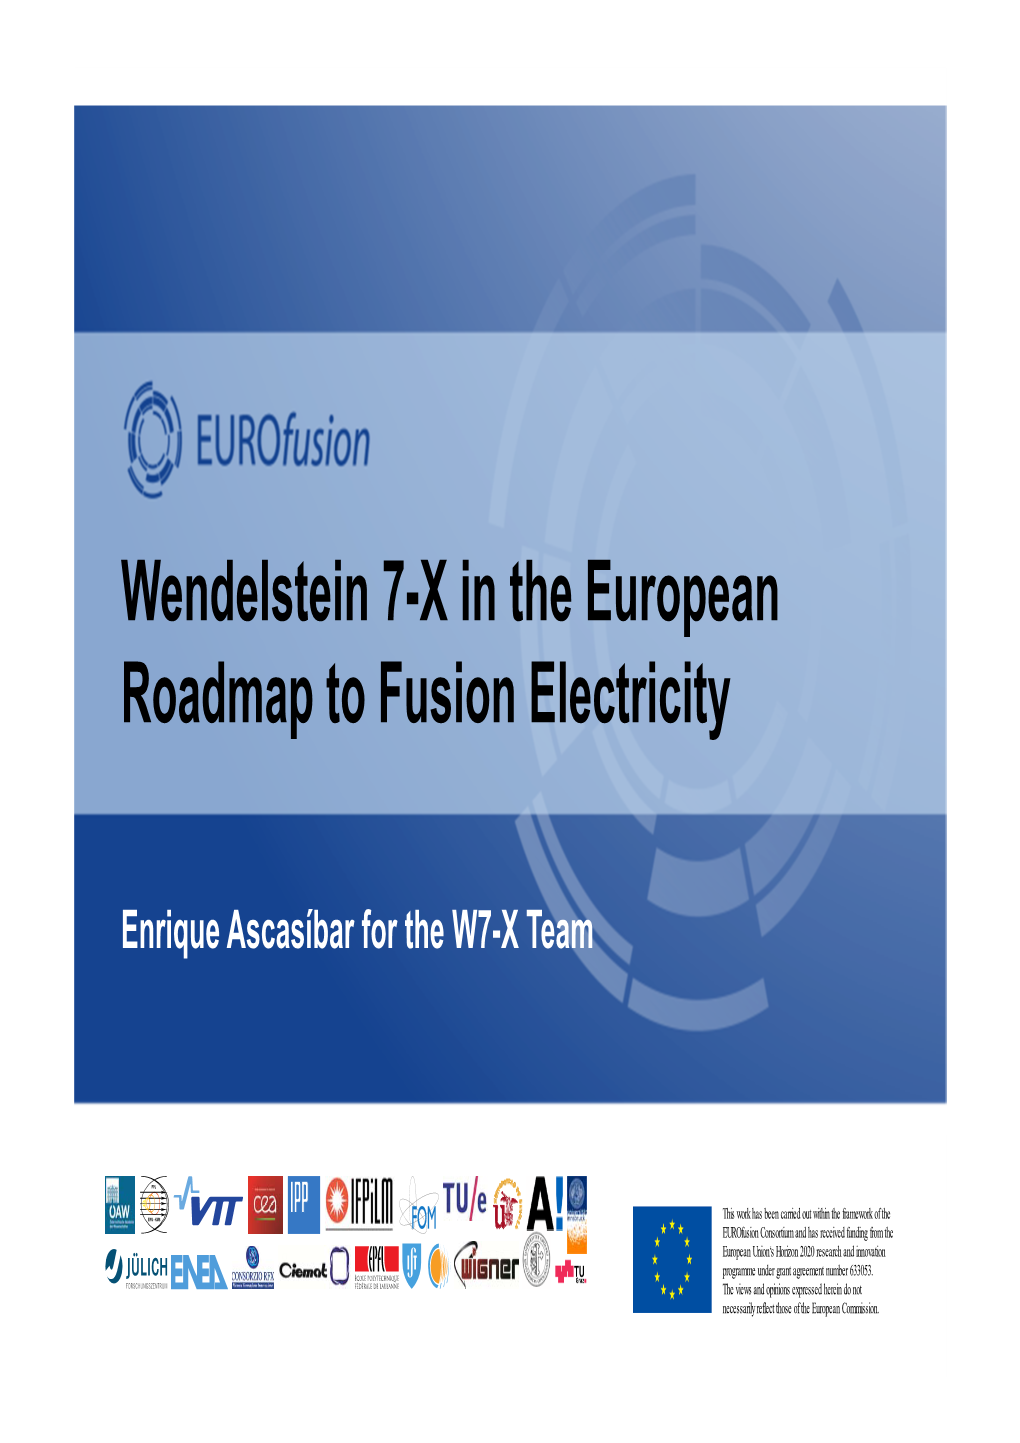 Wendelstein 7-X in the European Roadmap to Fusion Electricity